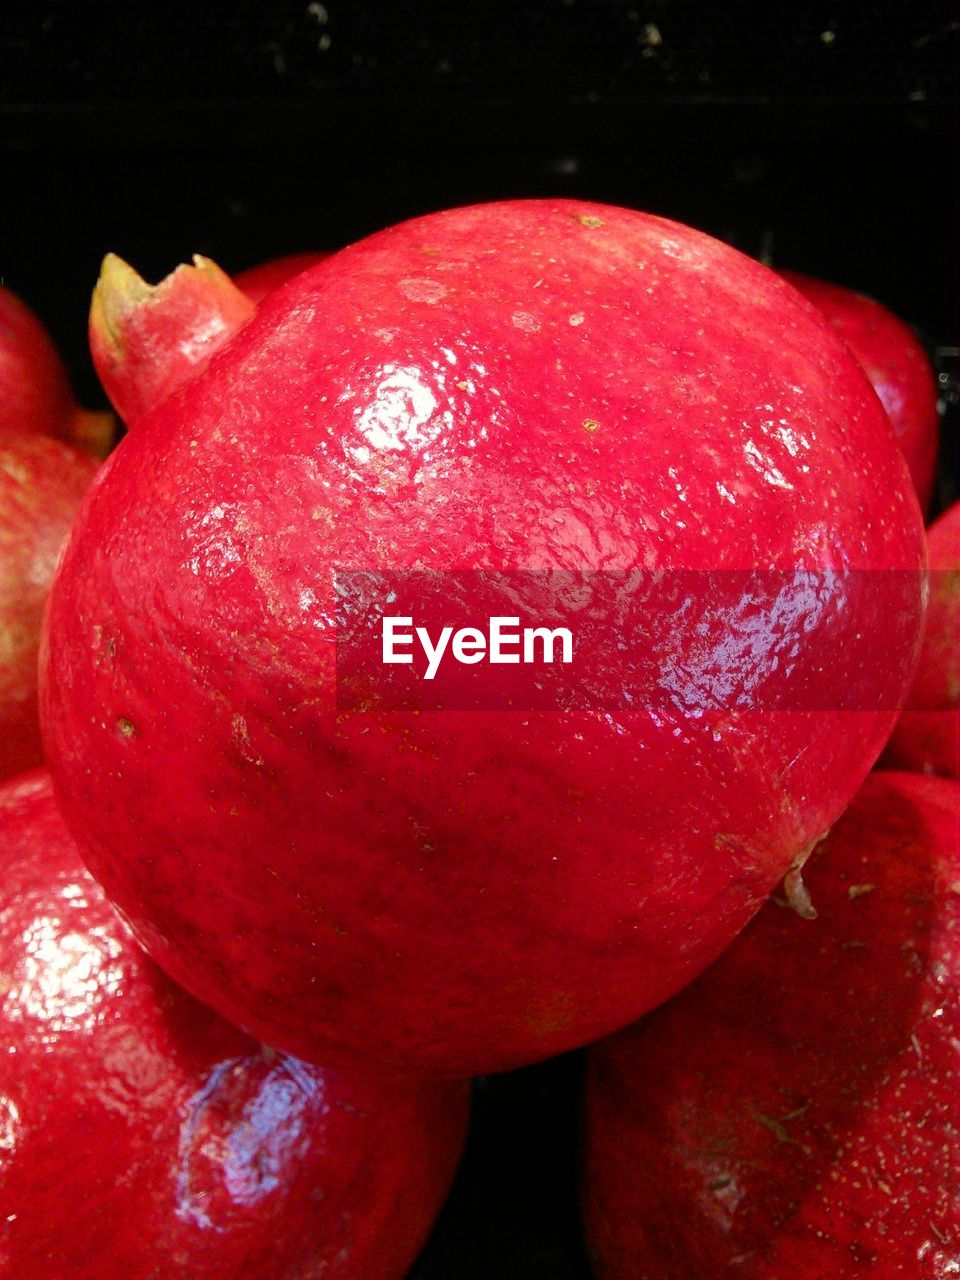 CLOSE UP OF RED FRUIT